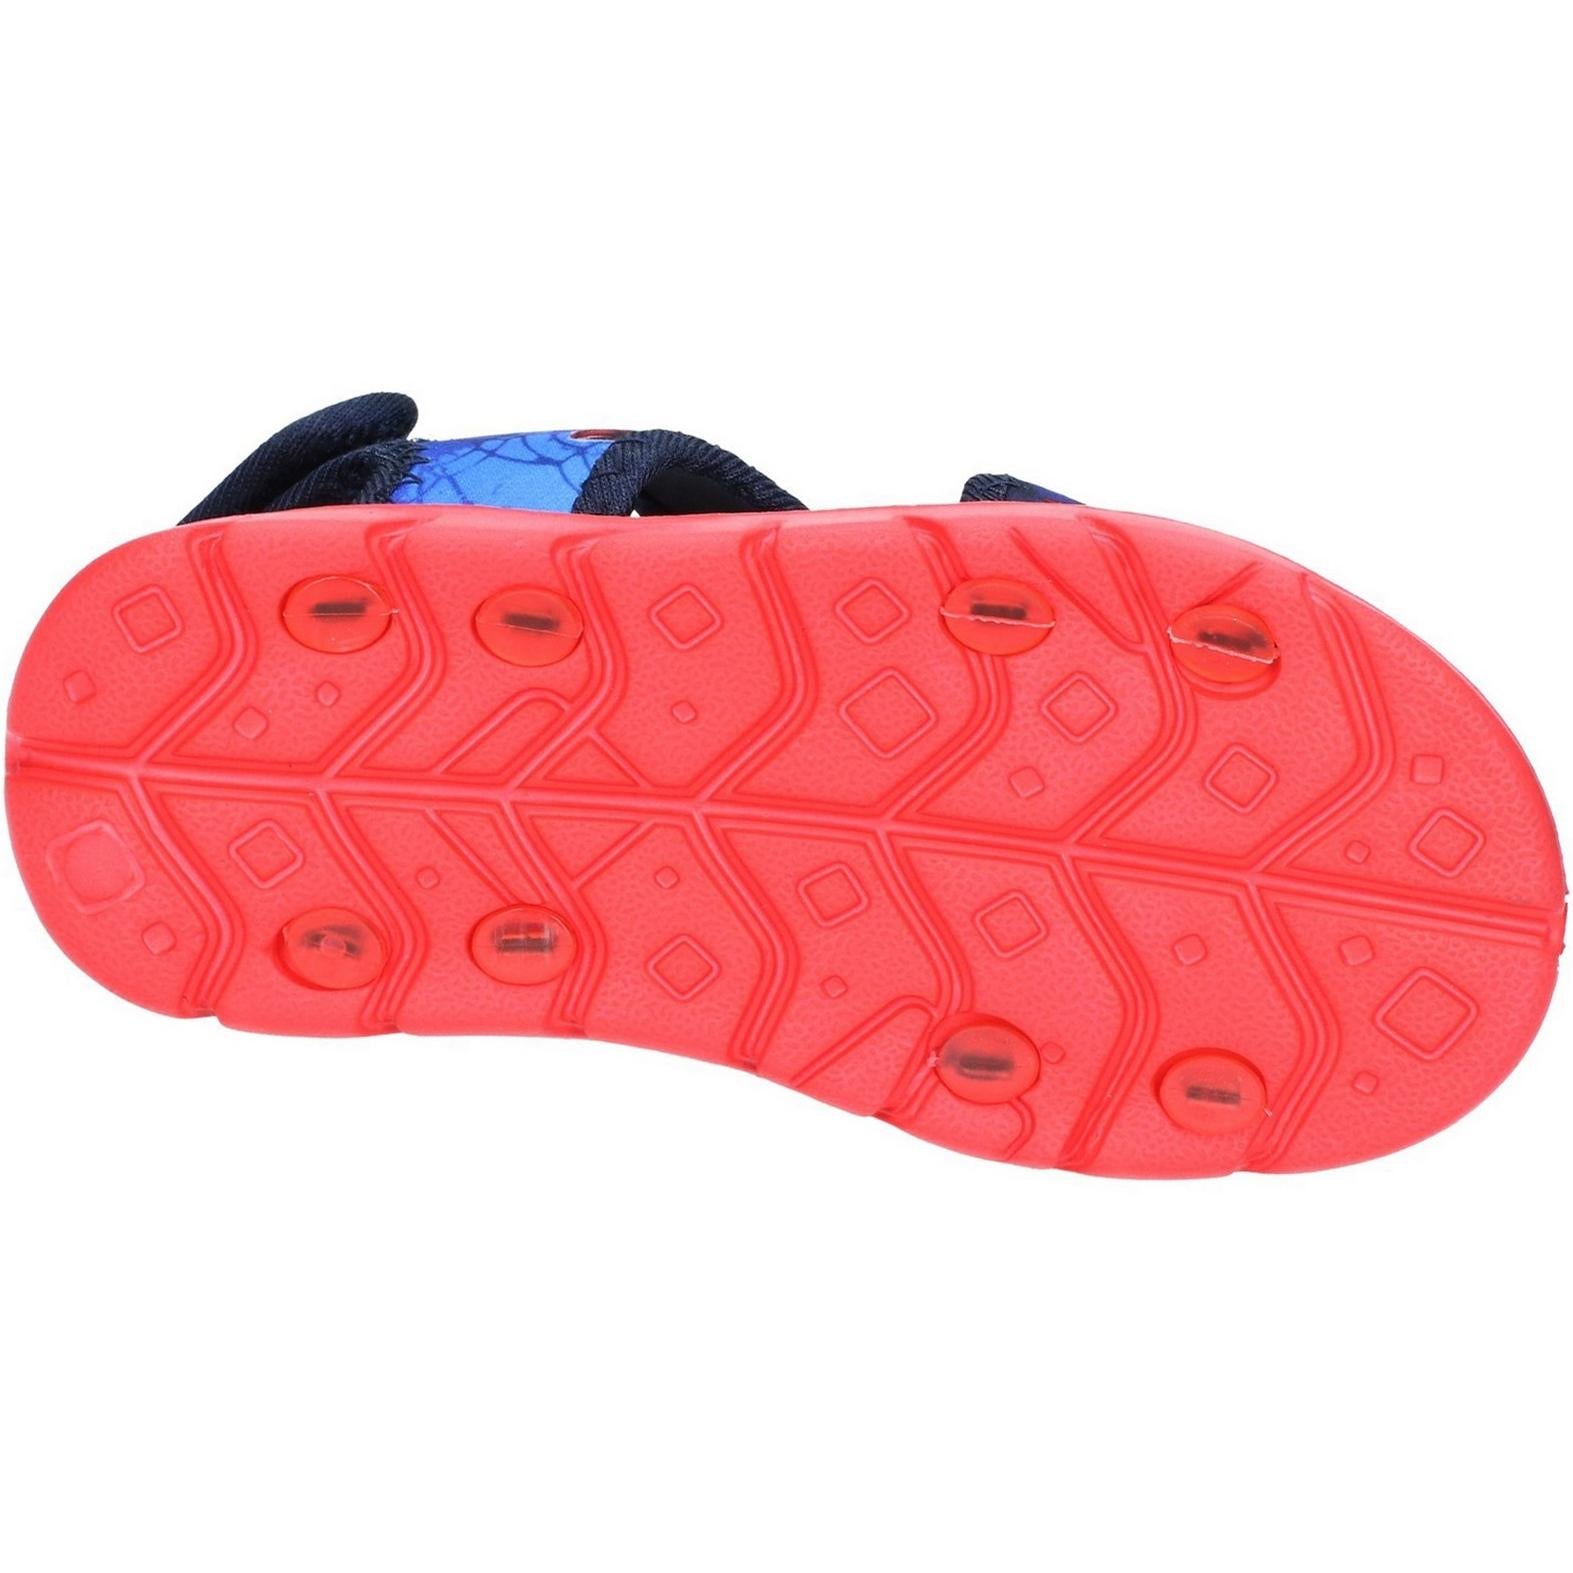 Leomil Spiderman Classic Sandals touch fastening shoe